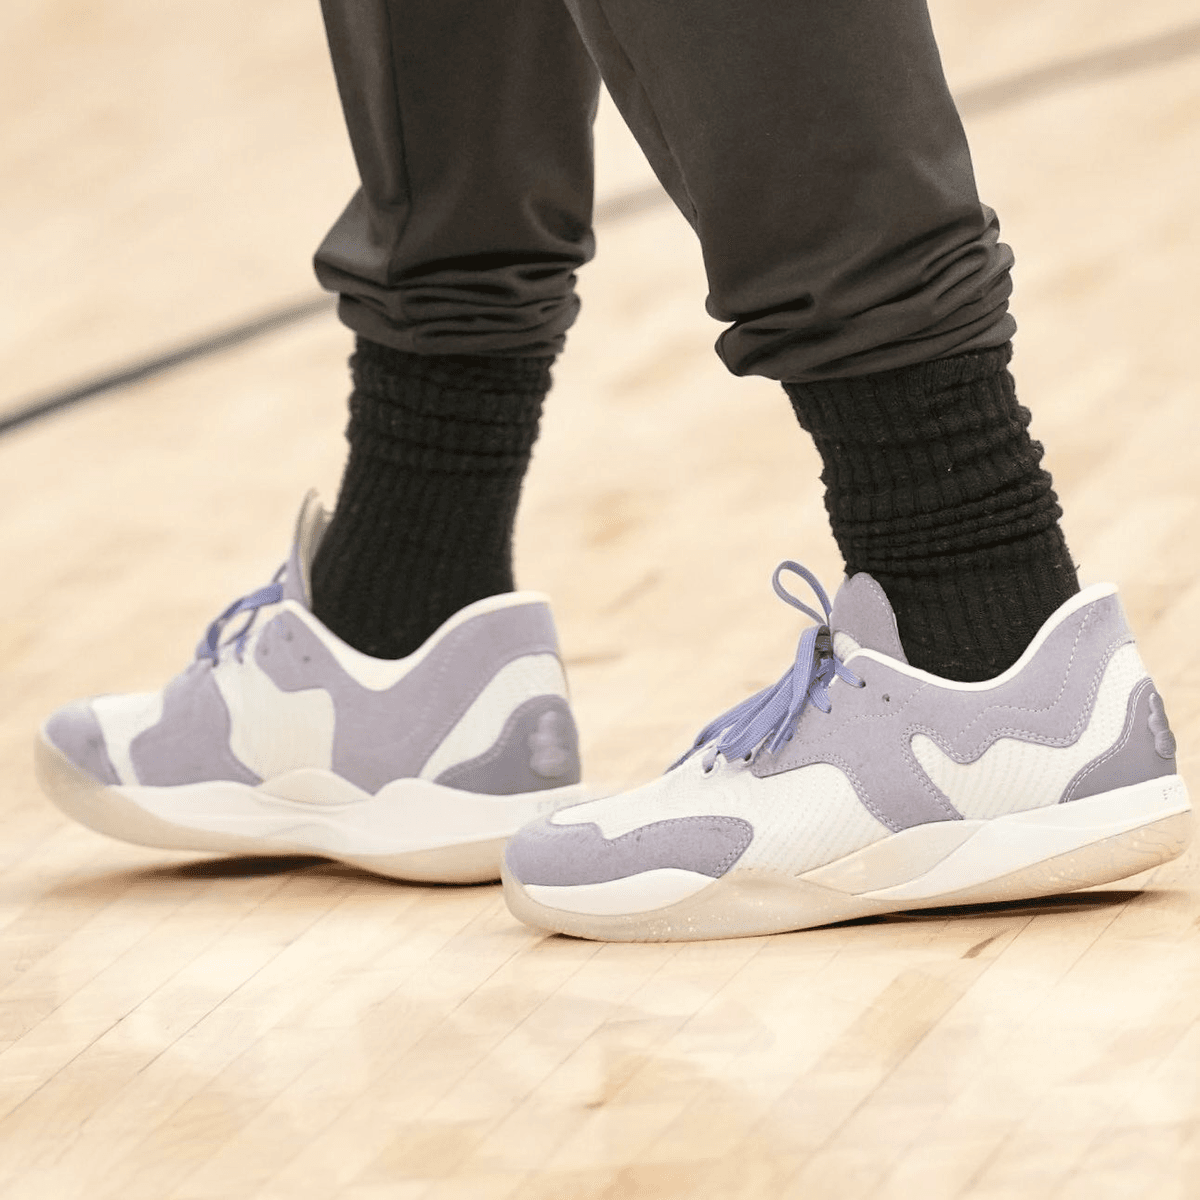 Kyrie Irving Debuts The Ethics LG Two At The Dallas Mavericks Shoot Around Foreshadowing A Possible Collaboration